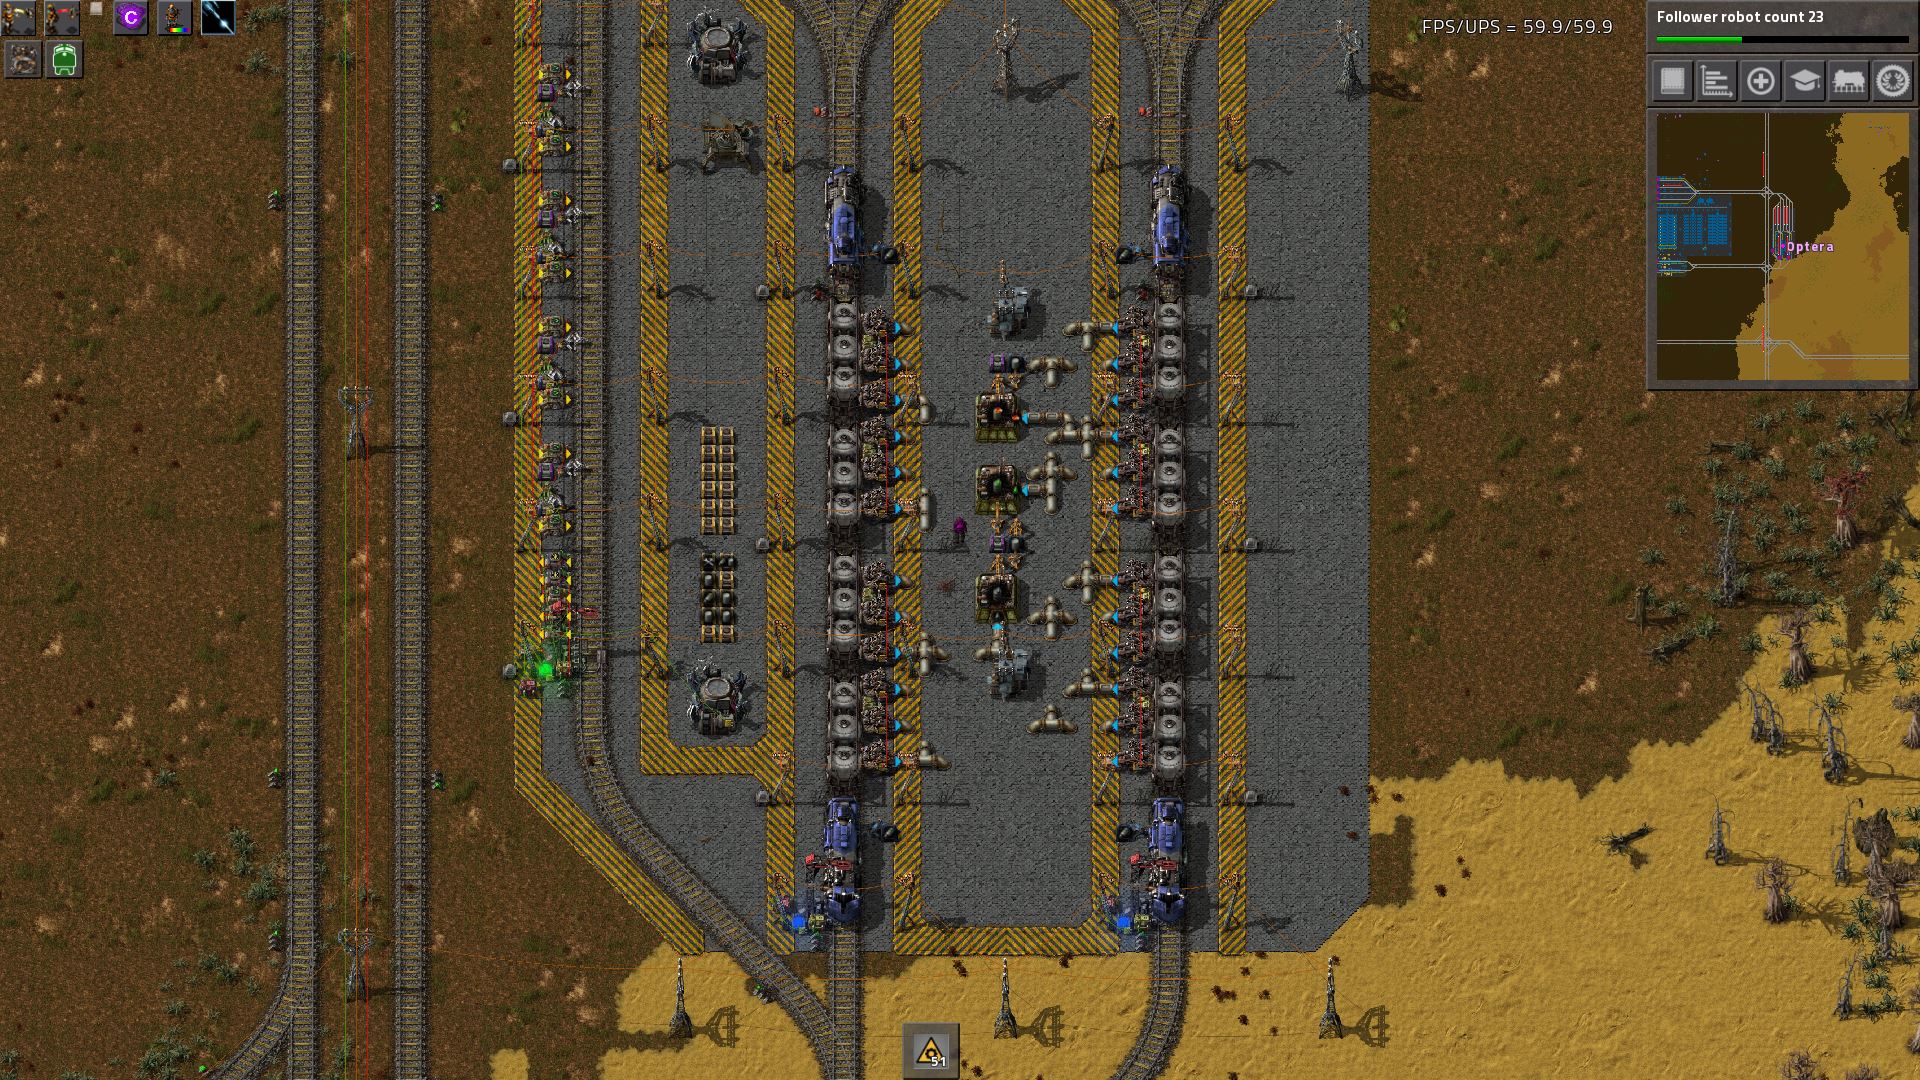 100% reliable, but inefficient 3 fluid cleaning depot